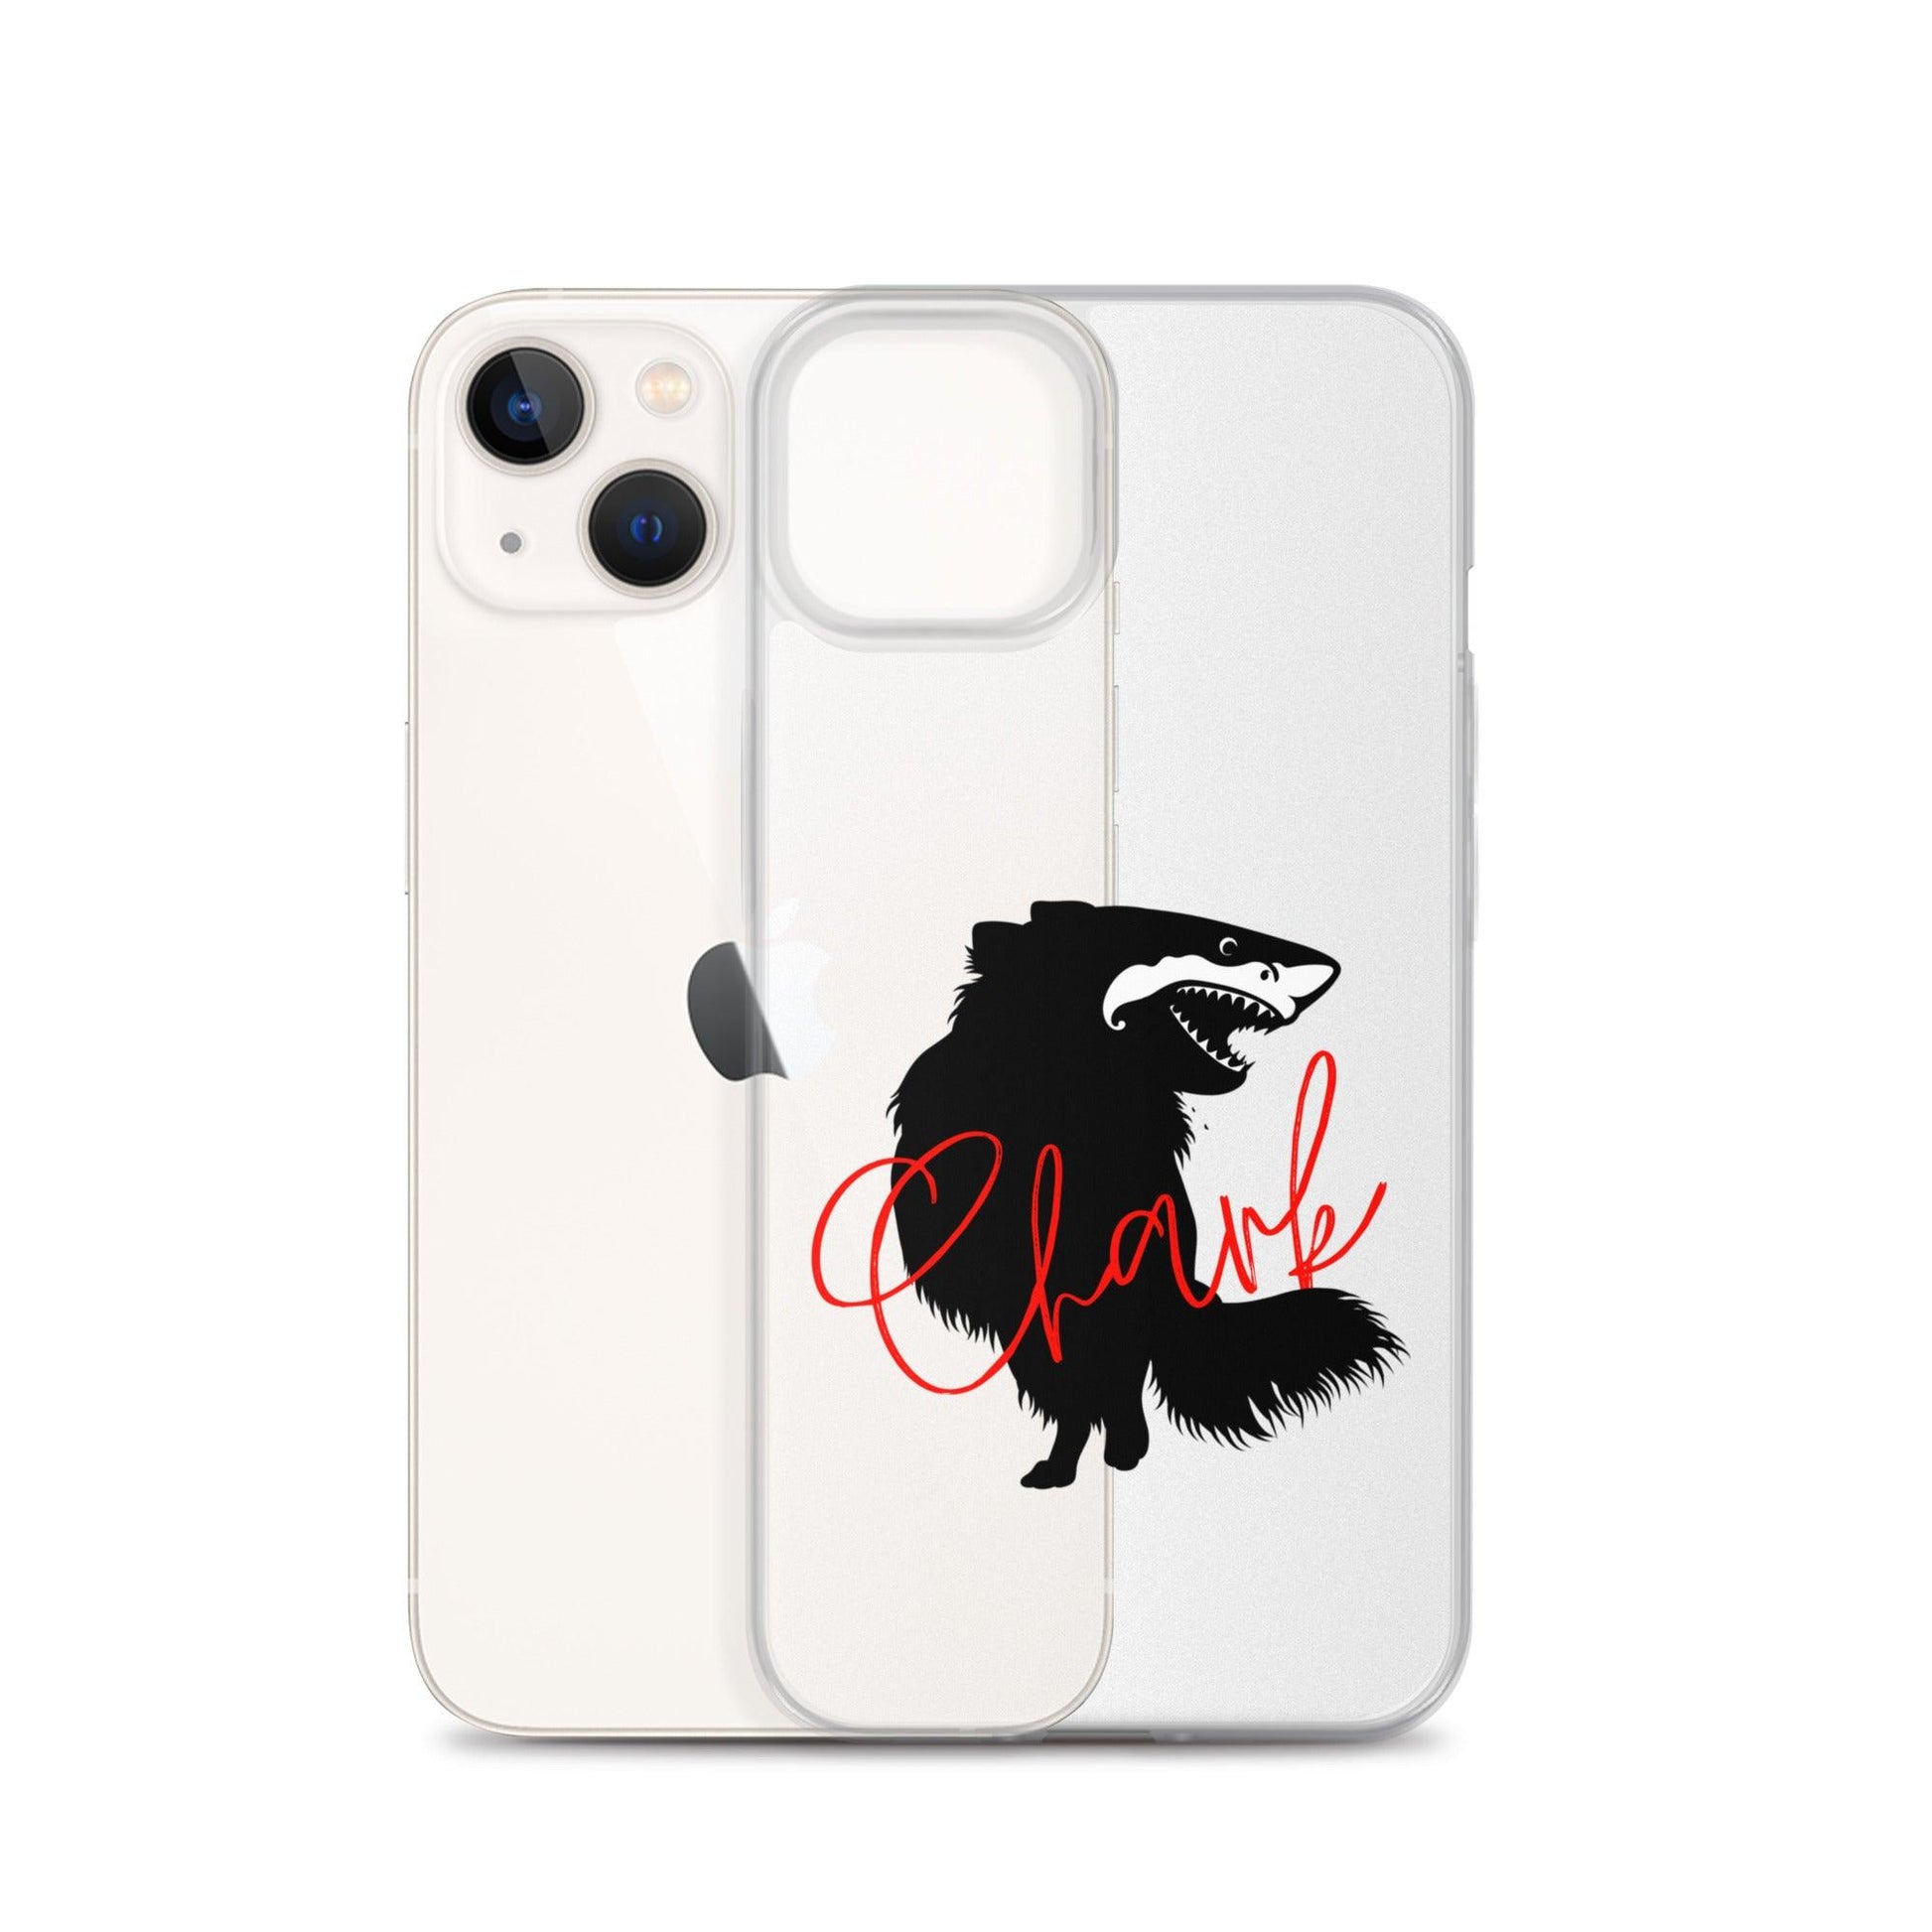 Chihuahua + Shark = Chark Clear iPhone case with the black silhouette of a longhaired chihuahua with the face of a great white shark - mouth open to show off jaws lined with lots of sharp white teeth. The word "Chark" is artfully placed in red cursive font over the image. For trendy chi lovers. iPhone 13 case.